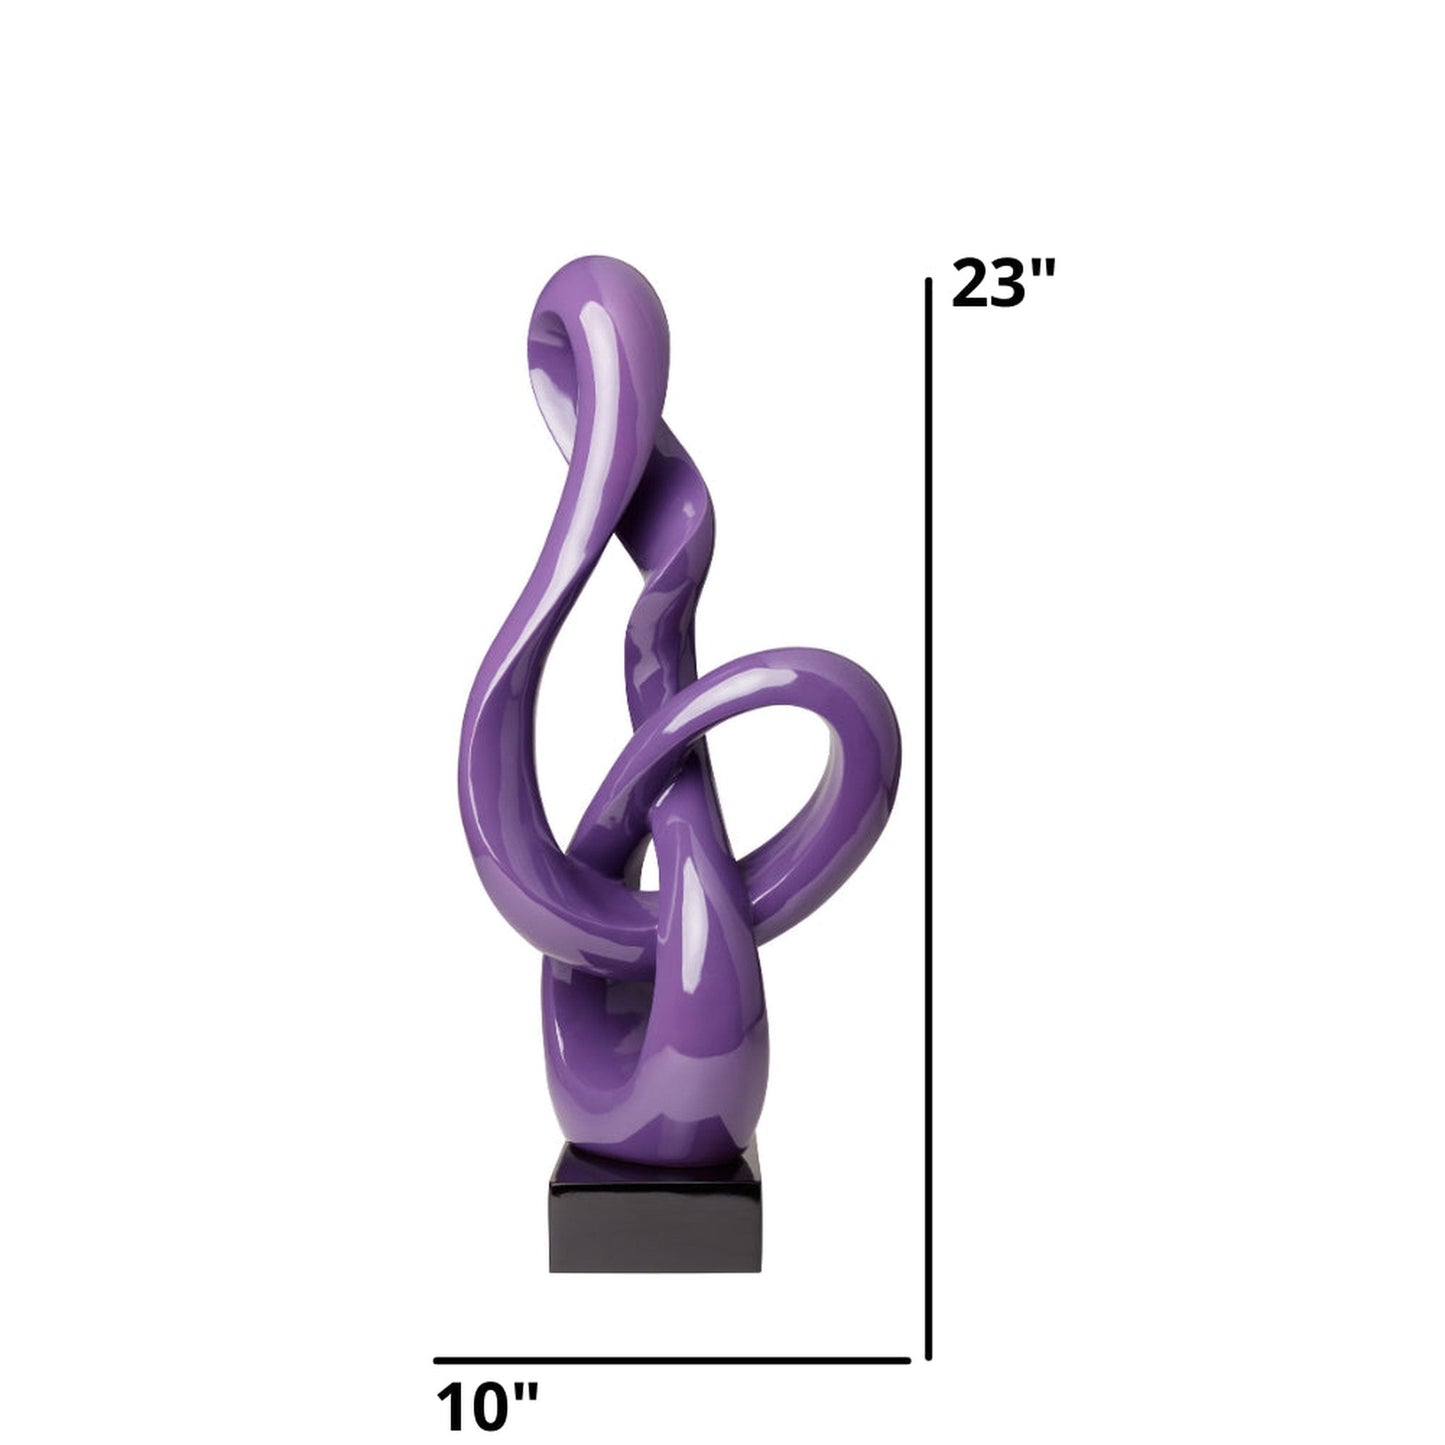 Antilia Abstract Sculpture // Small Violet